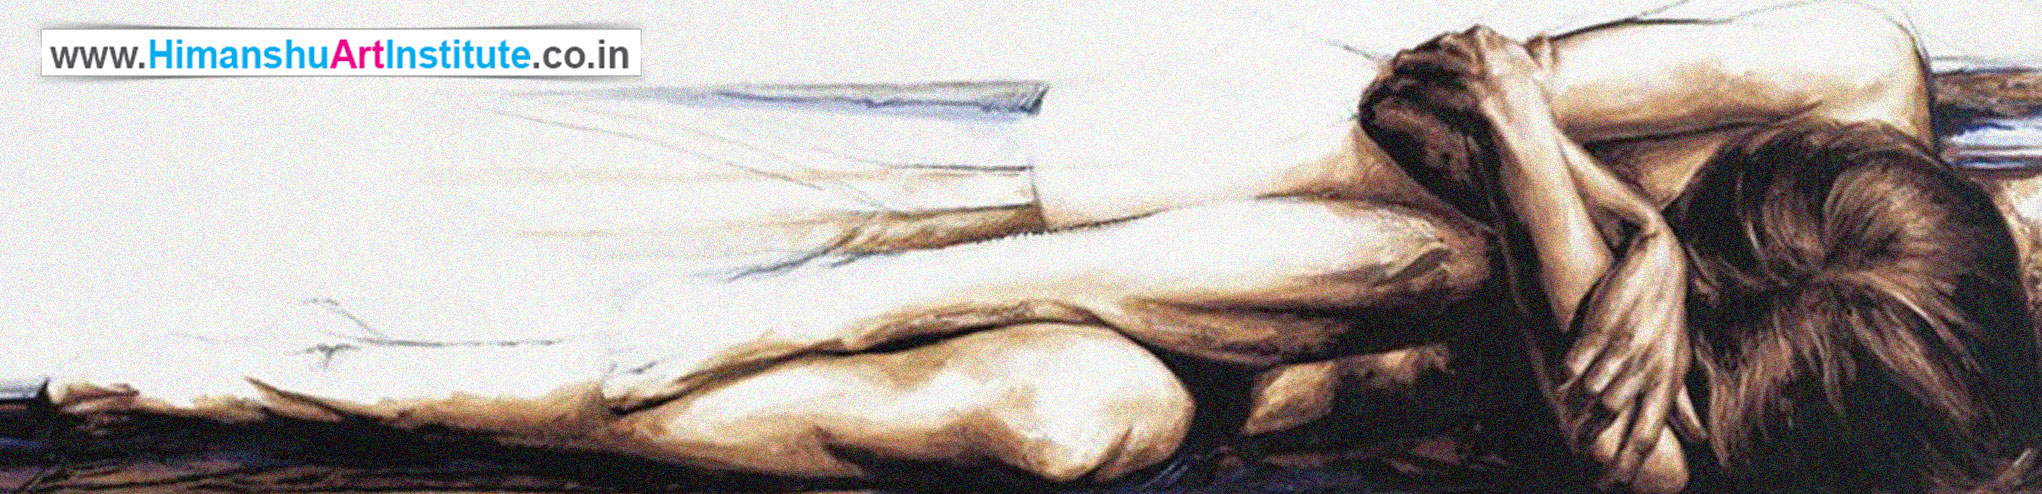 Online Certificate Course in Life Drawing, Life Drawing Classes in Delhi, India